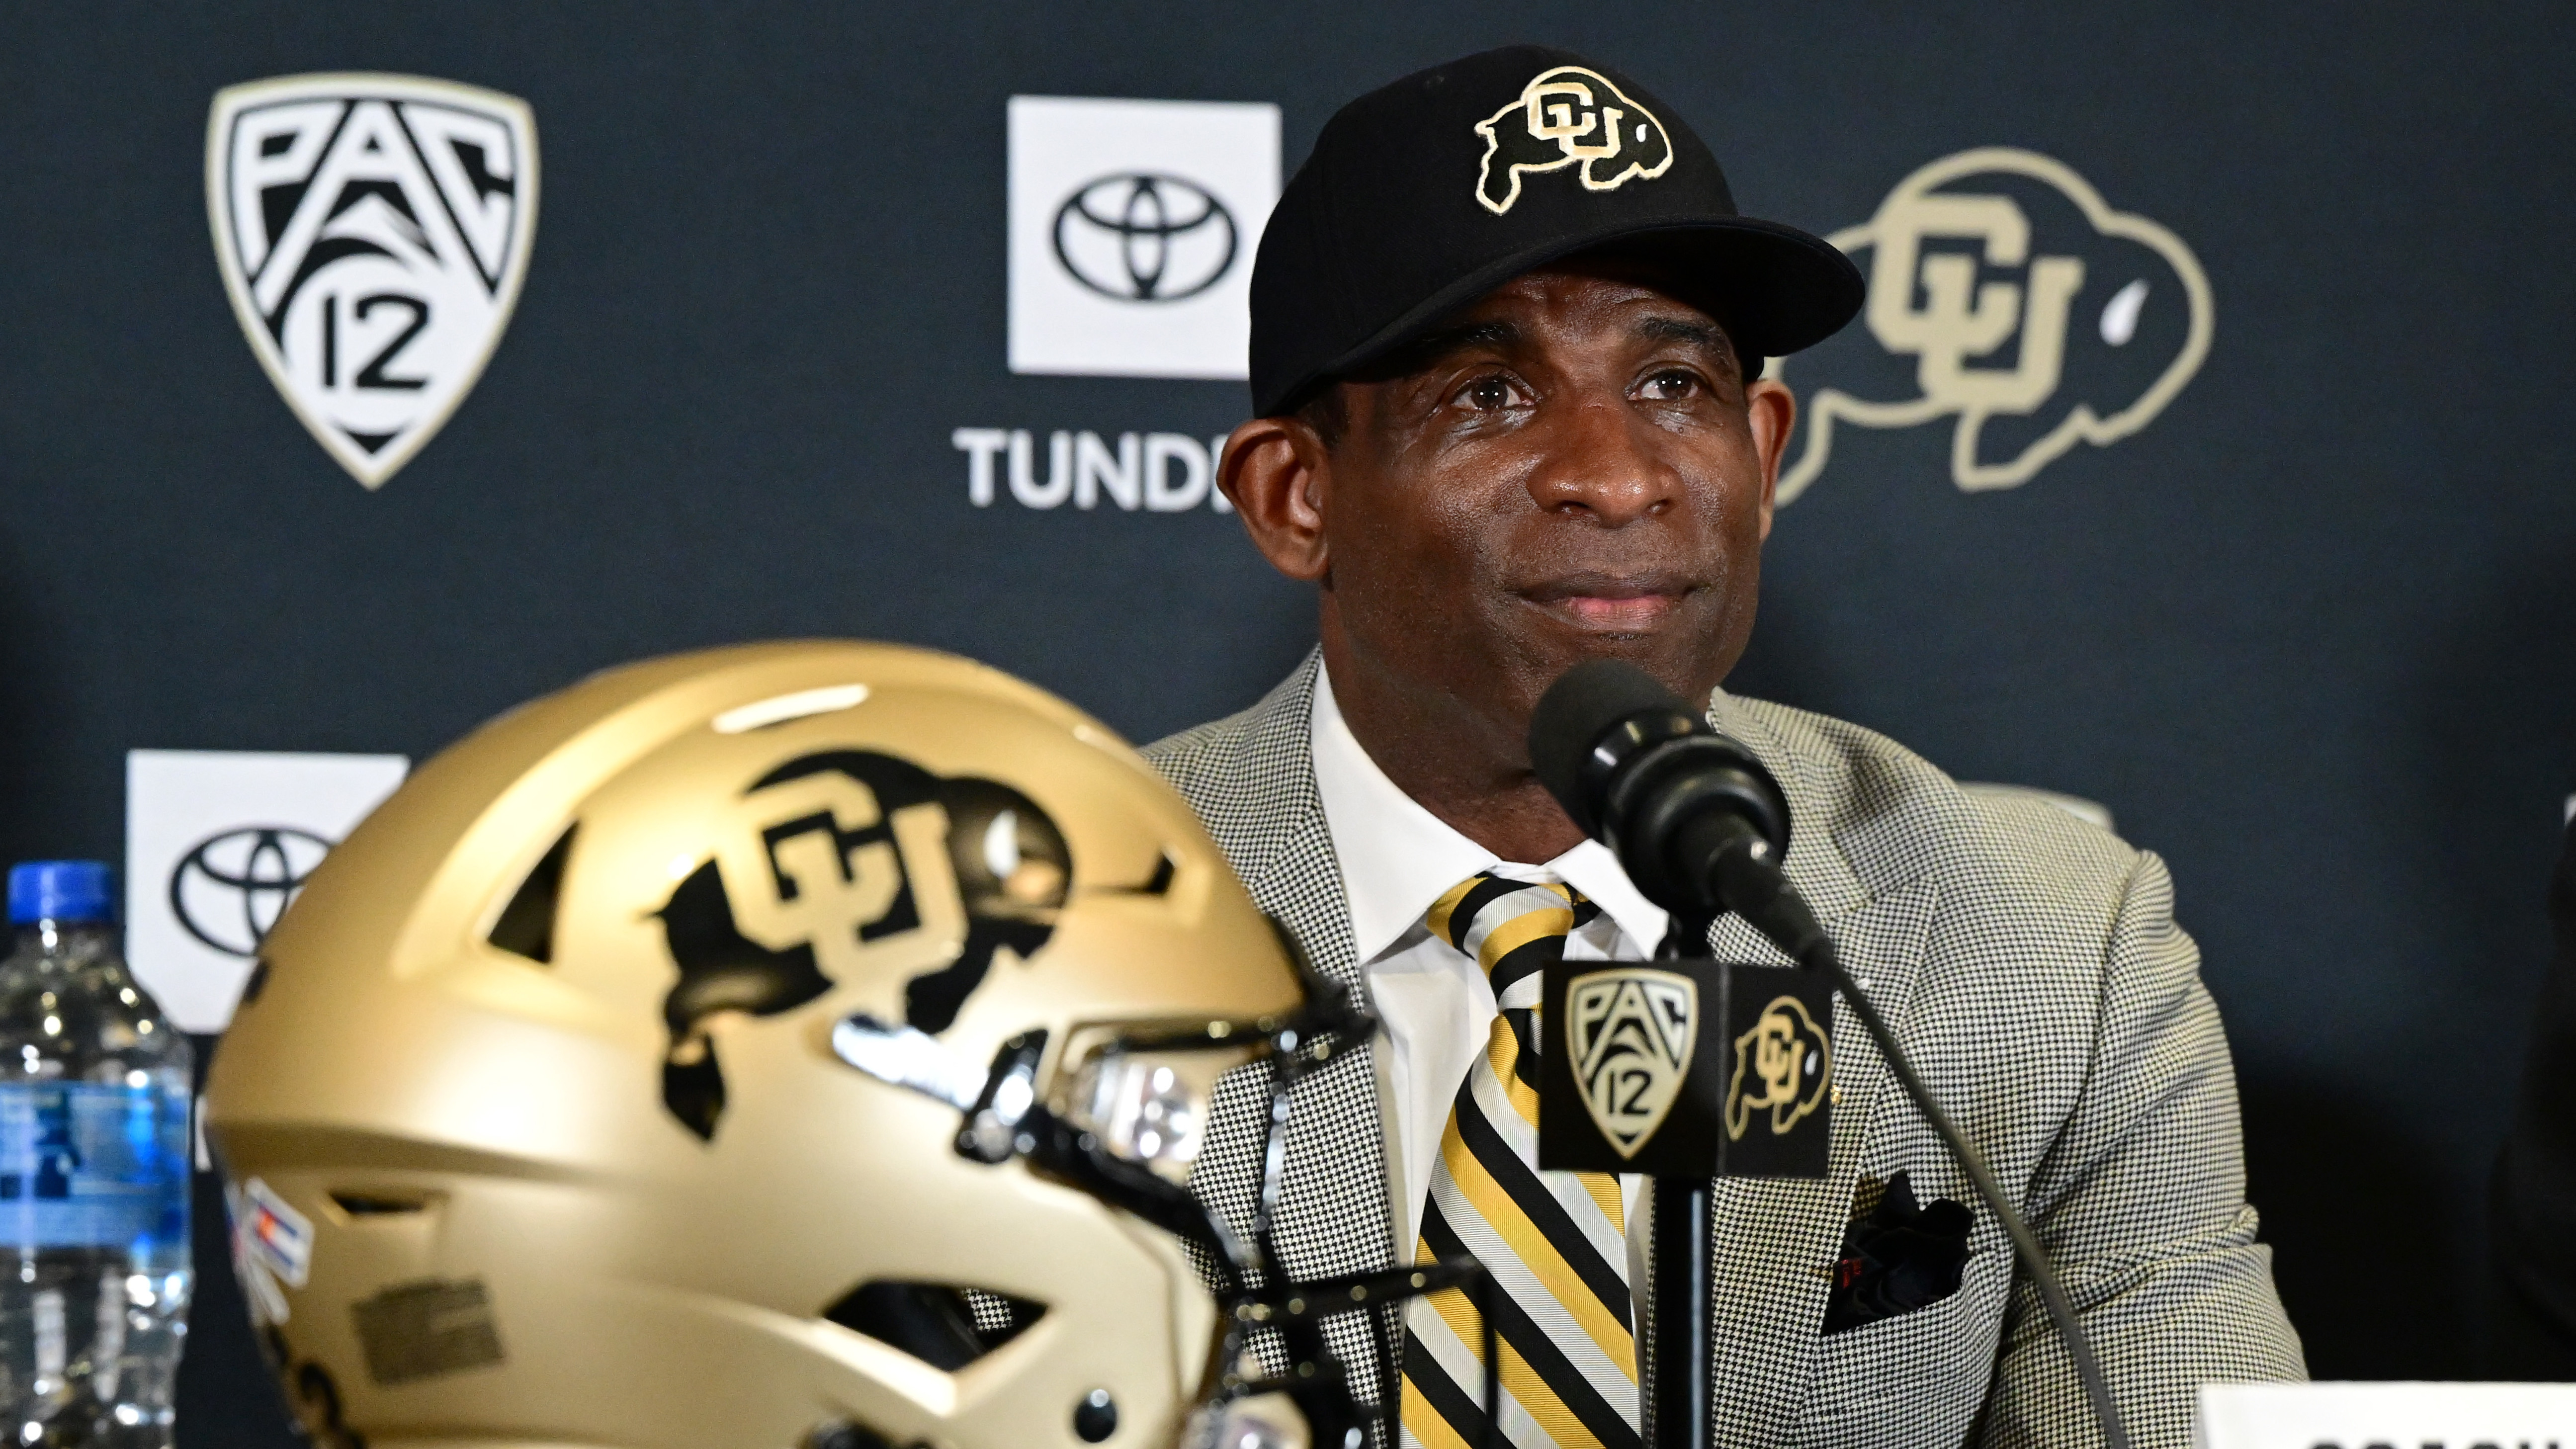 Deion Sanders was 'Coach' well before he was ever 'Prime